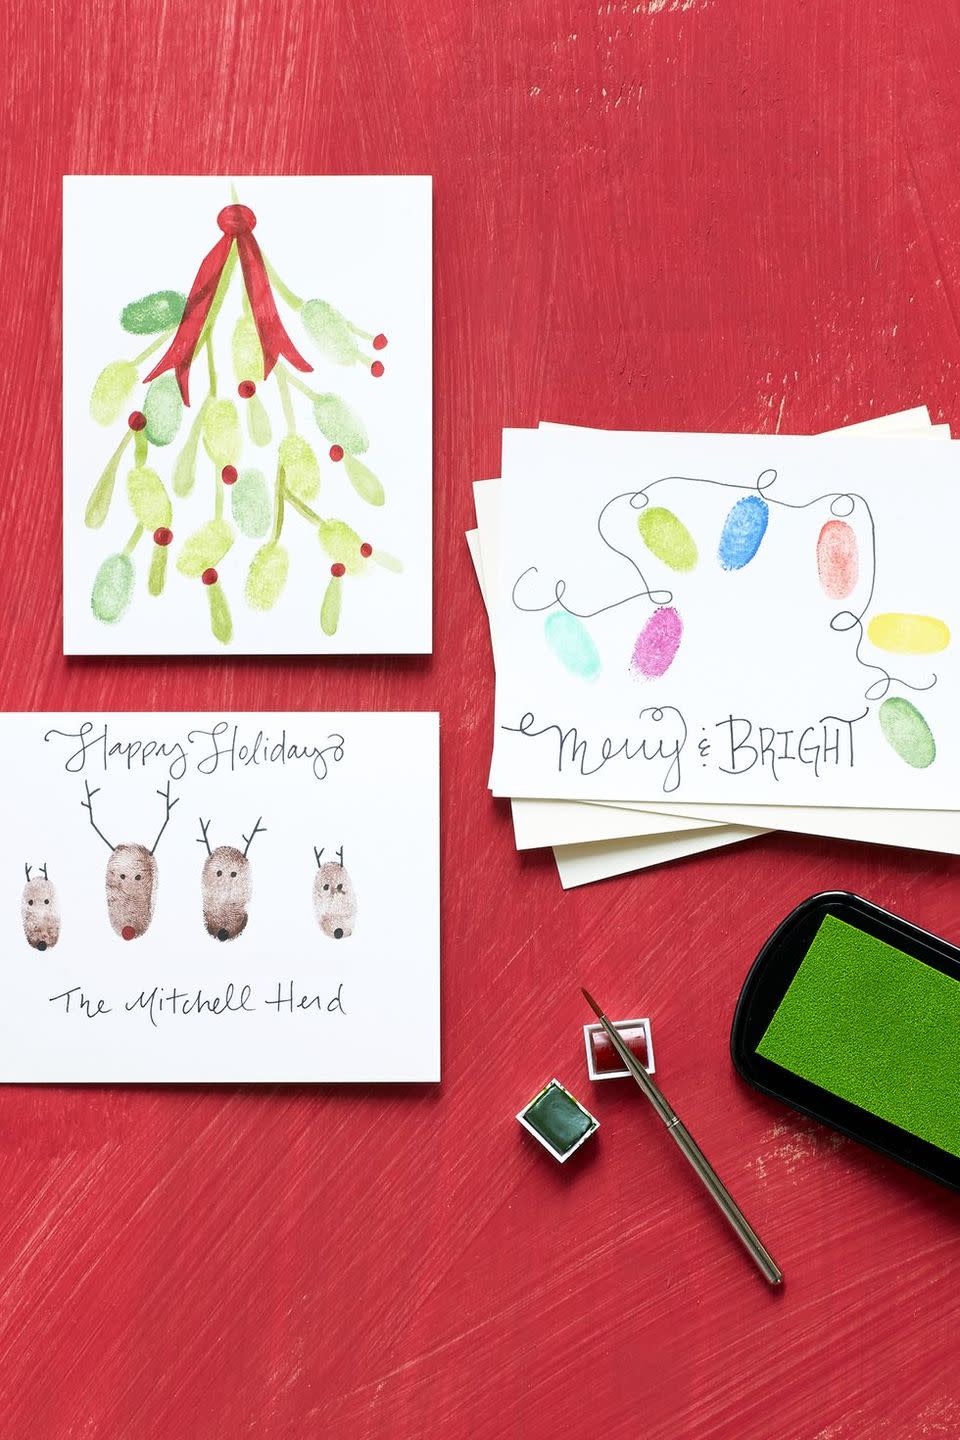 22) Craft your own Christmas cards.